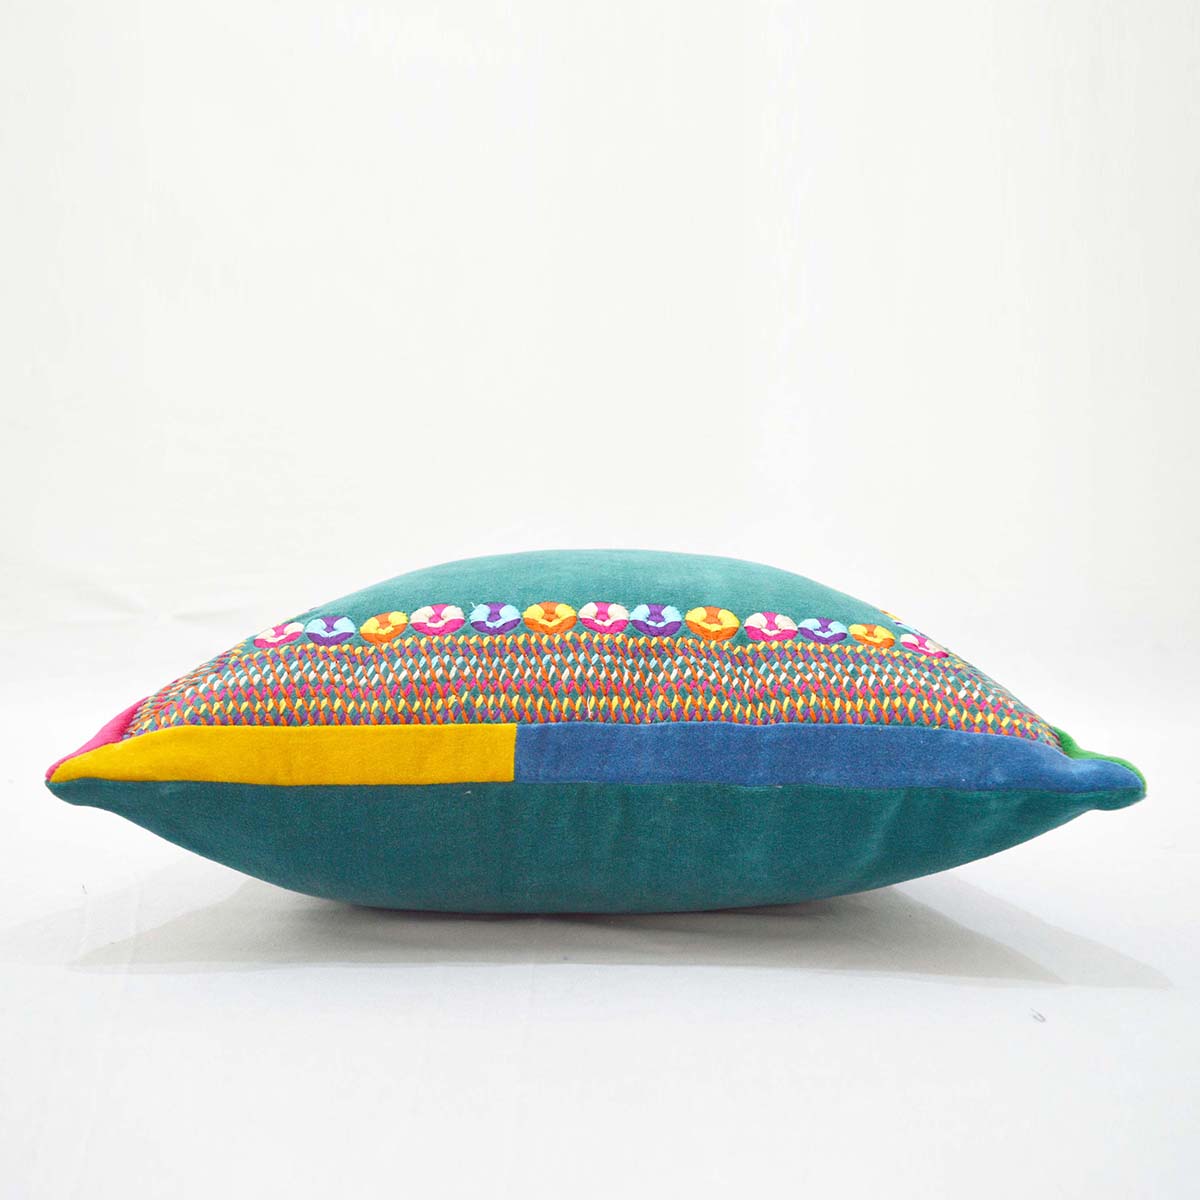 Carnival - Teal pillow cover, multicolour hand embroidery, bohemian decor cushion cover